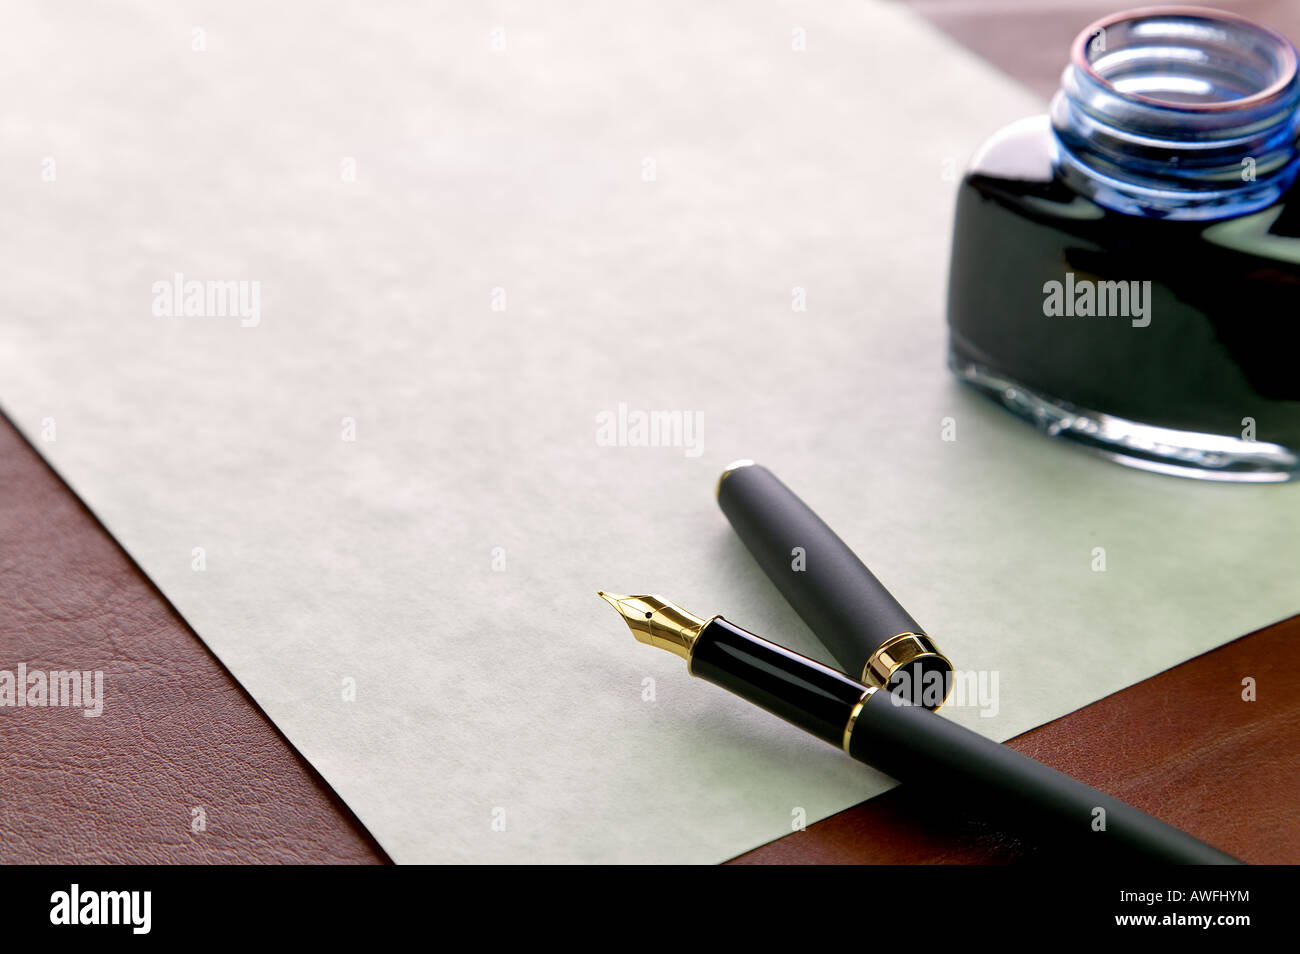 Writing Calligraphy Ink-Desktop Square Bottle with Wax Seal Screw Cap